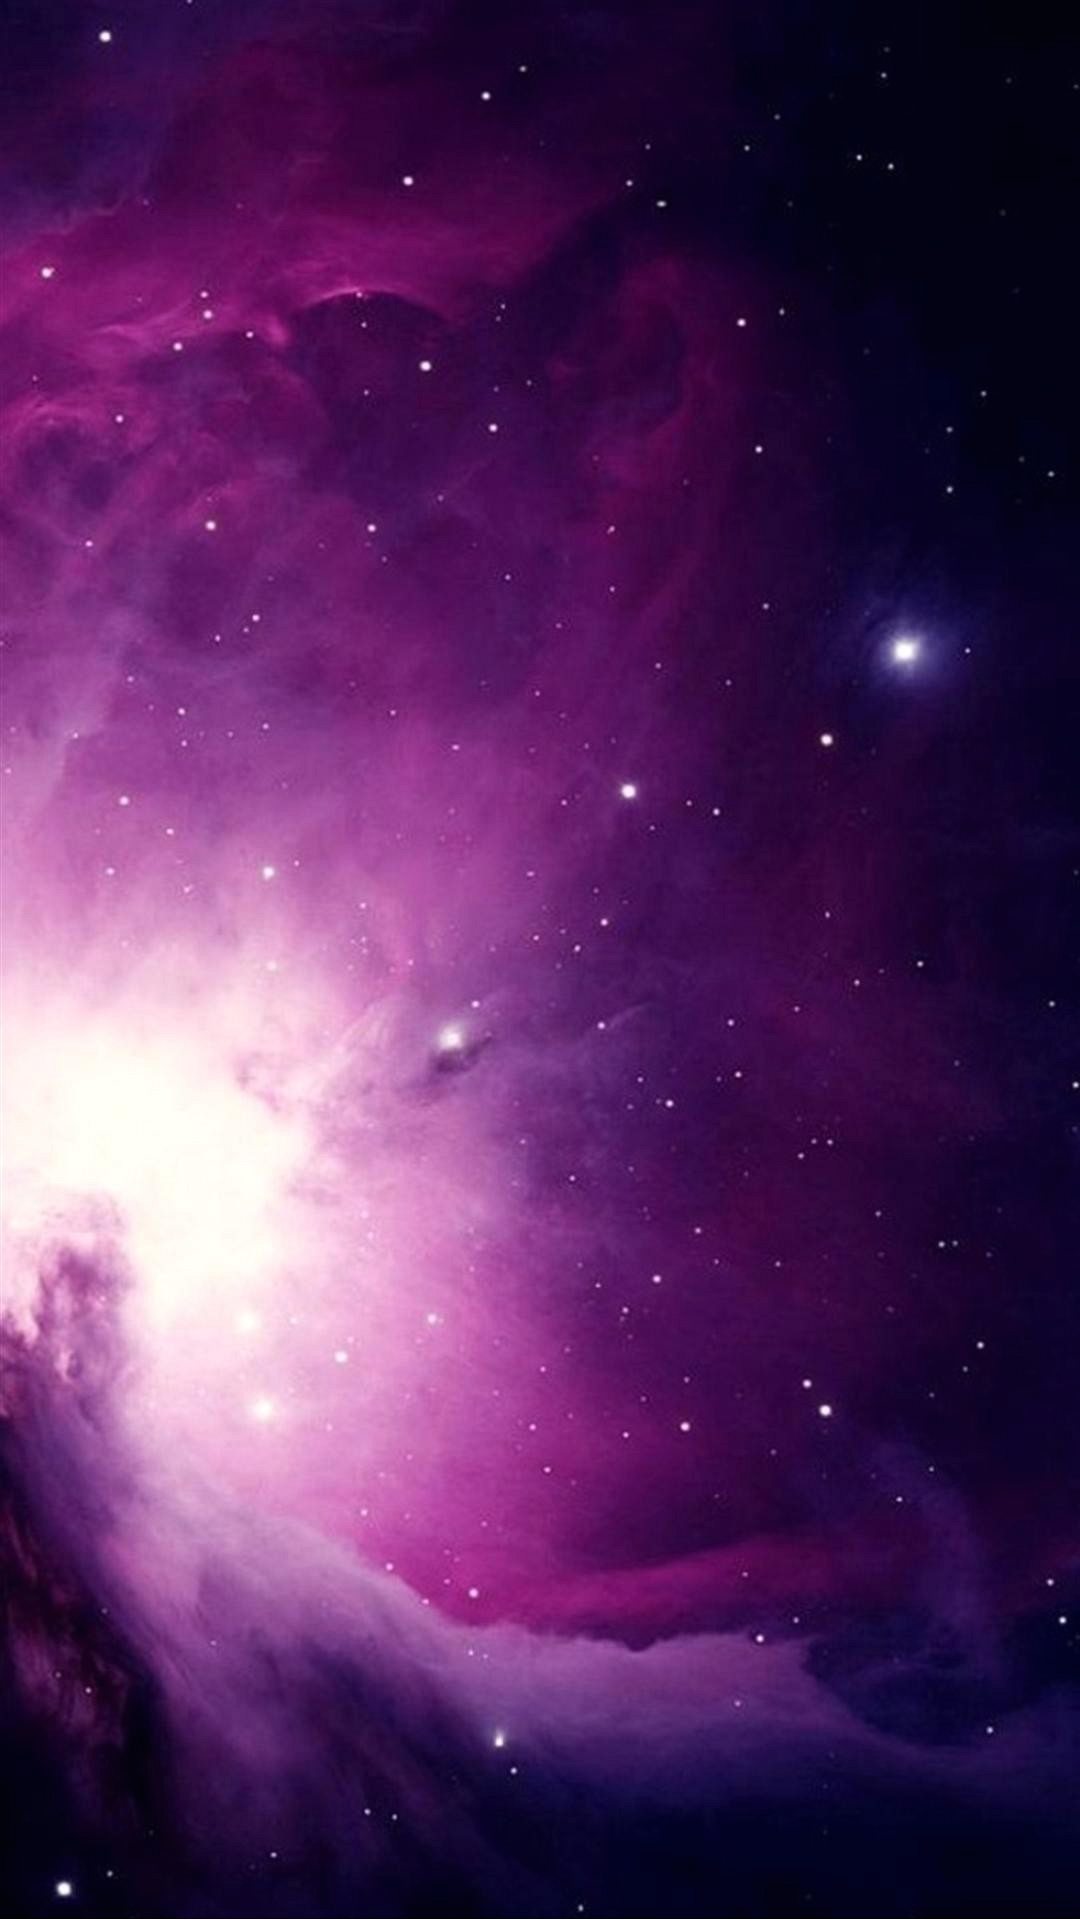 wallpapers full hd,sky,outer space,purple,violet,atmosphere